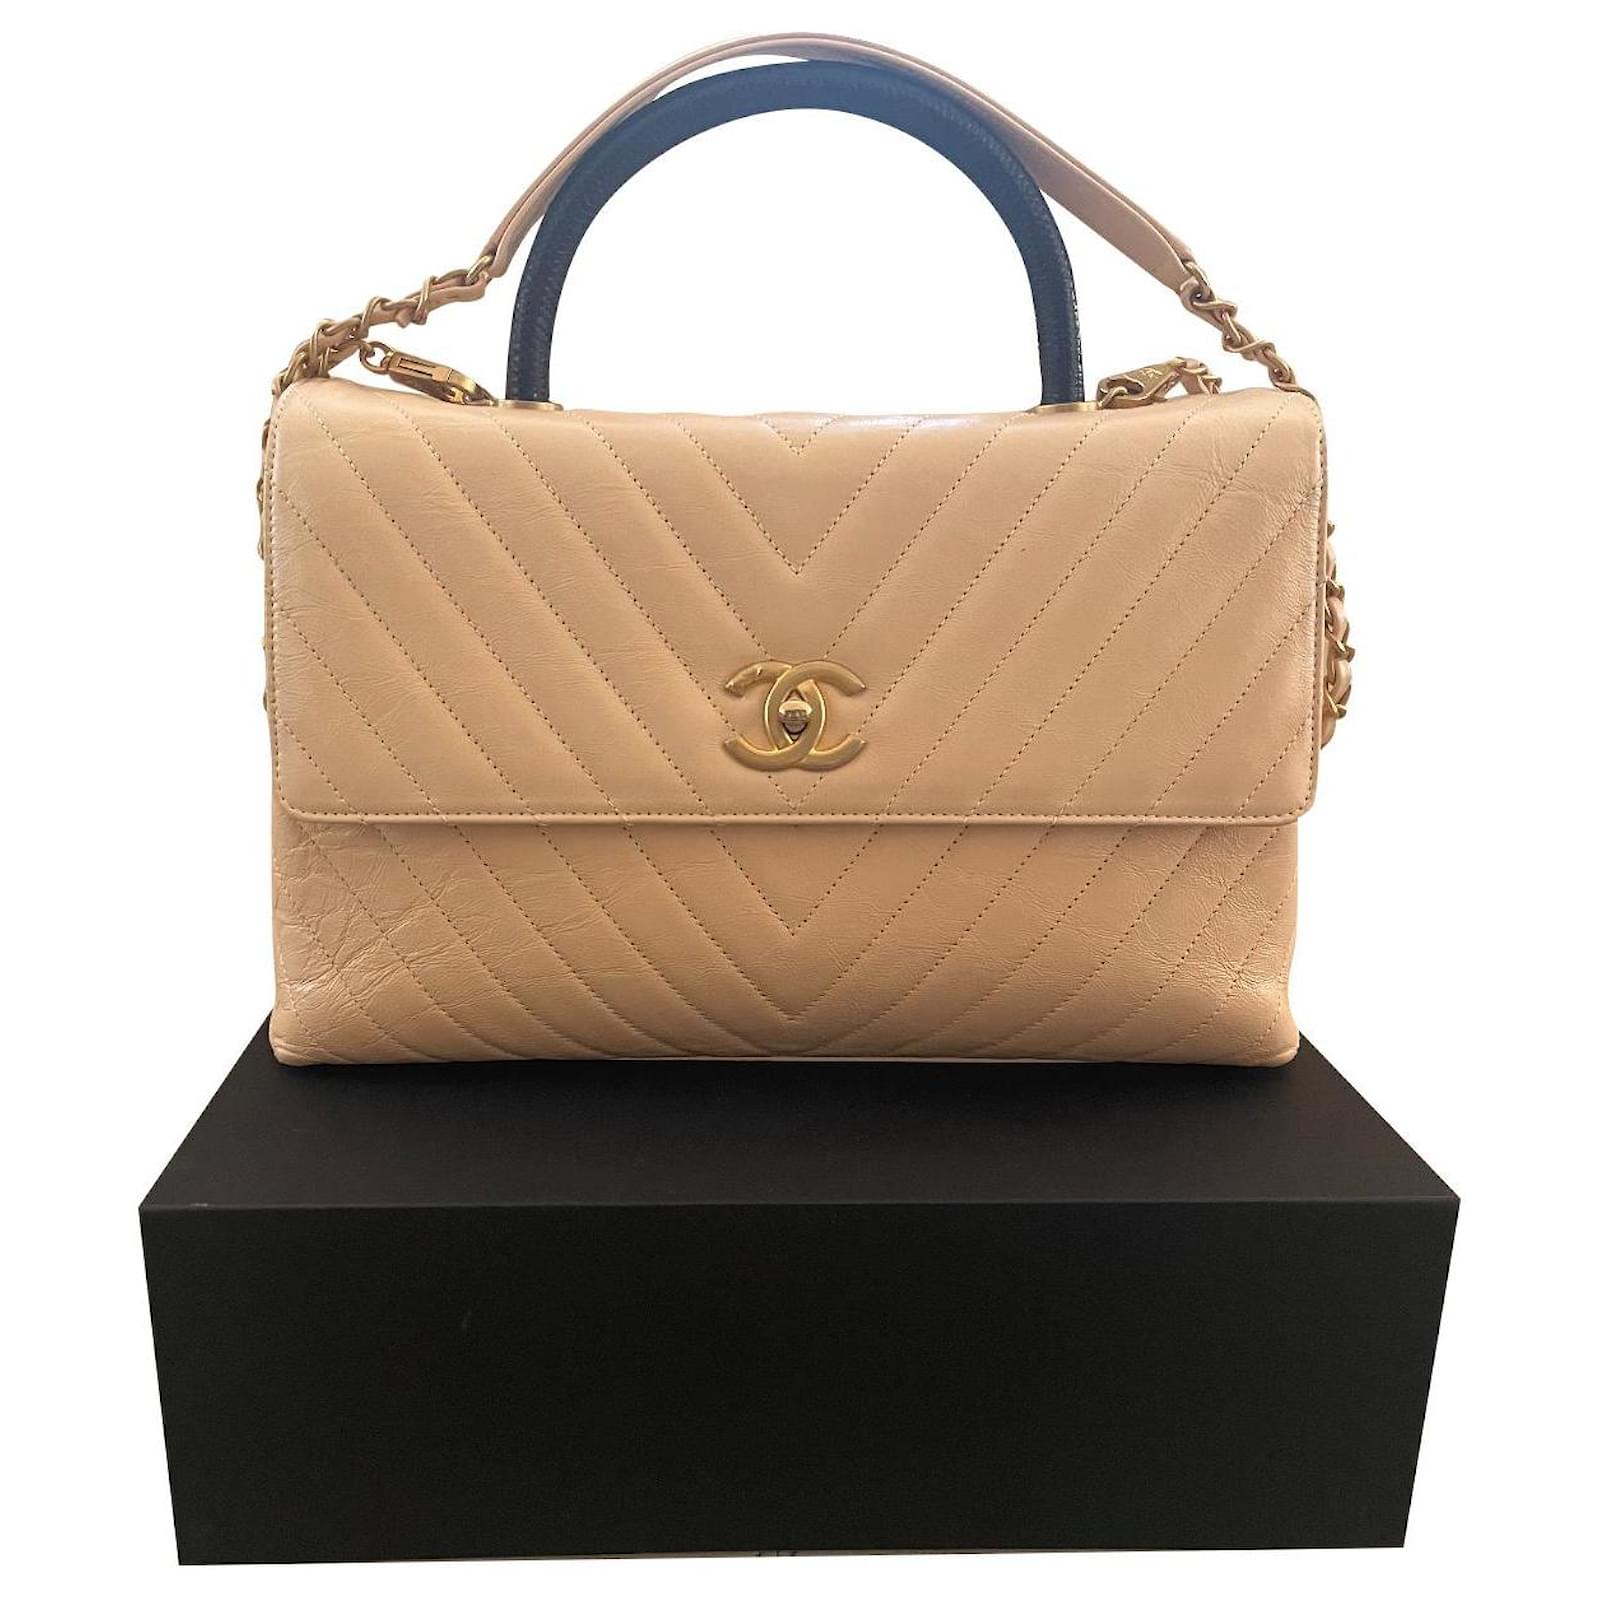 Chanel - Authenticated Coco Luxe Handbag - Leather Beige Plain for Women, Very Good Condition